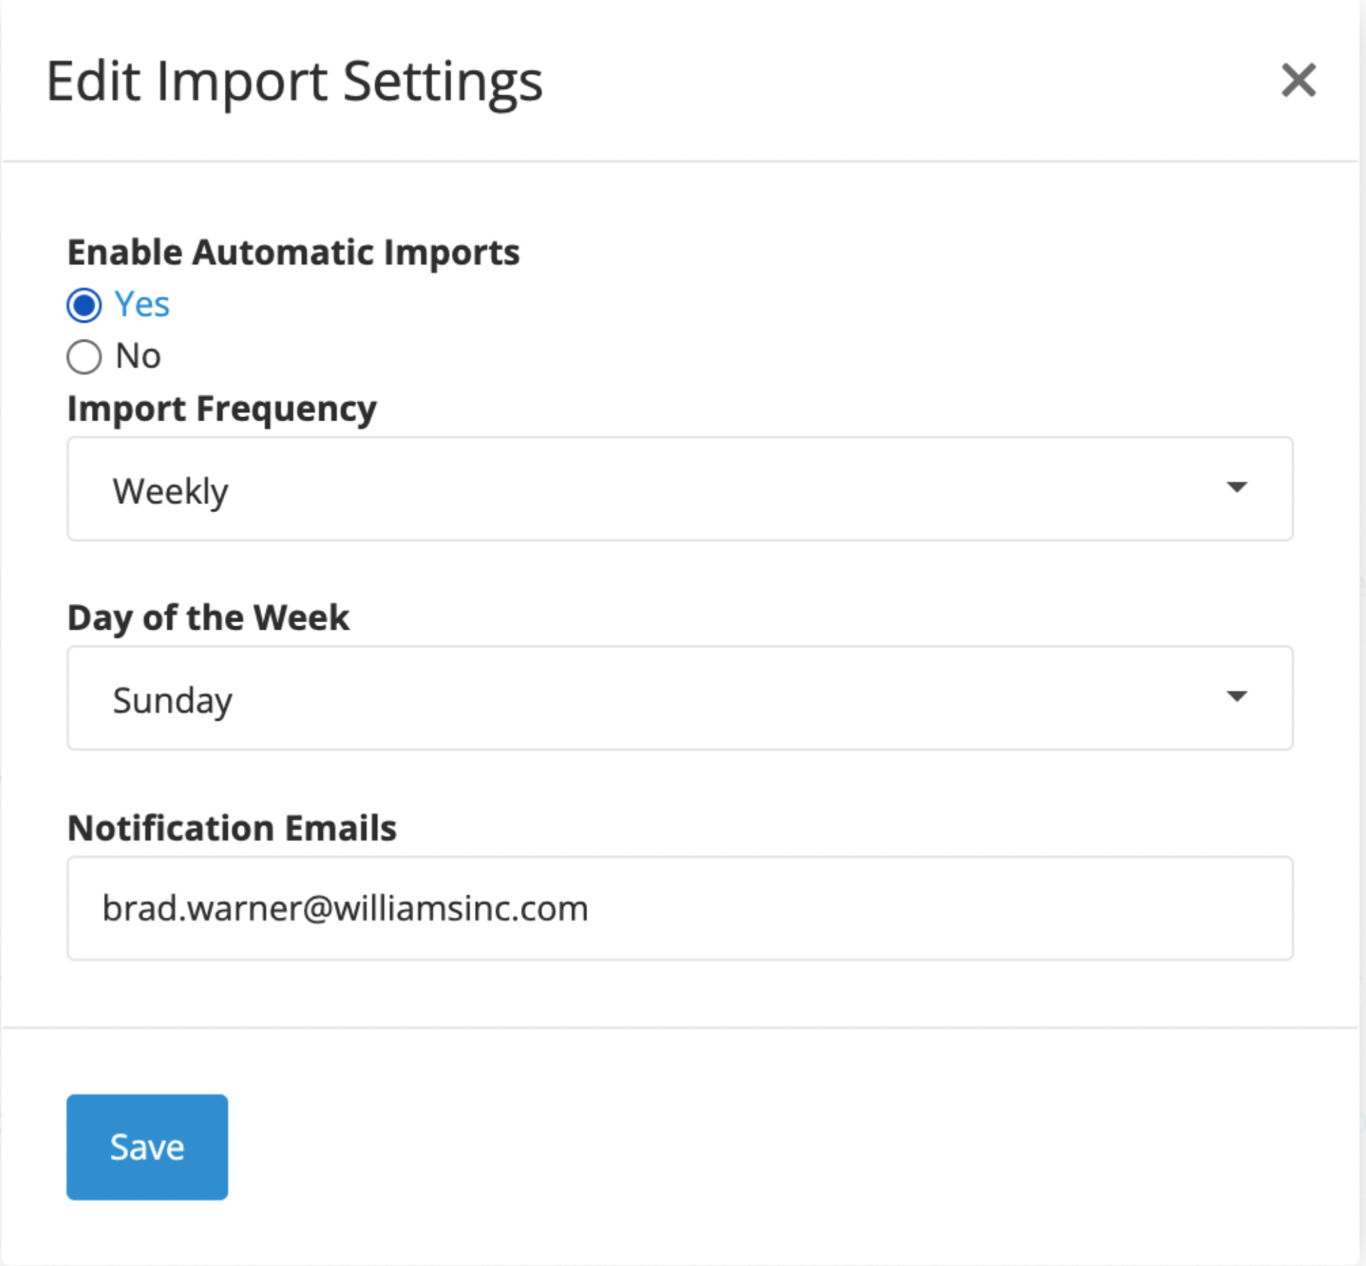 Edit import settings modal showing import frequency fields